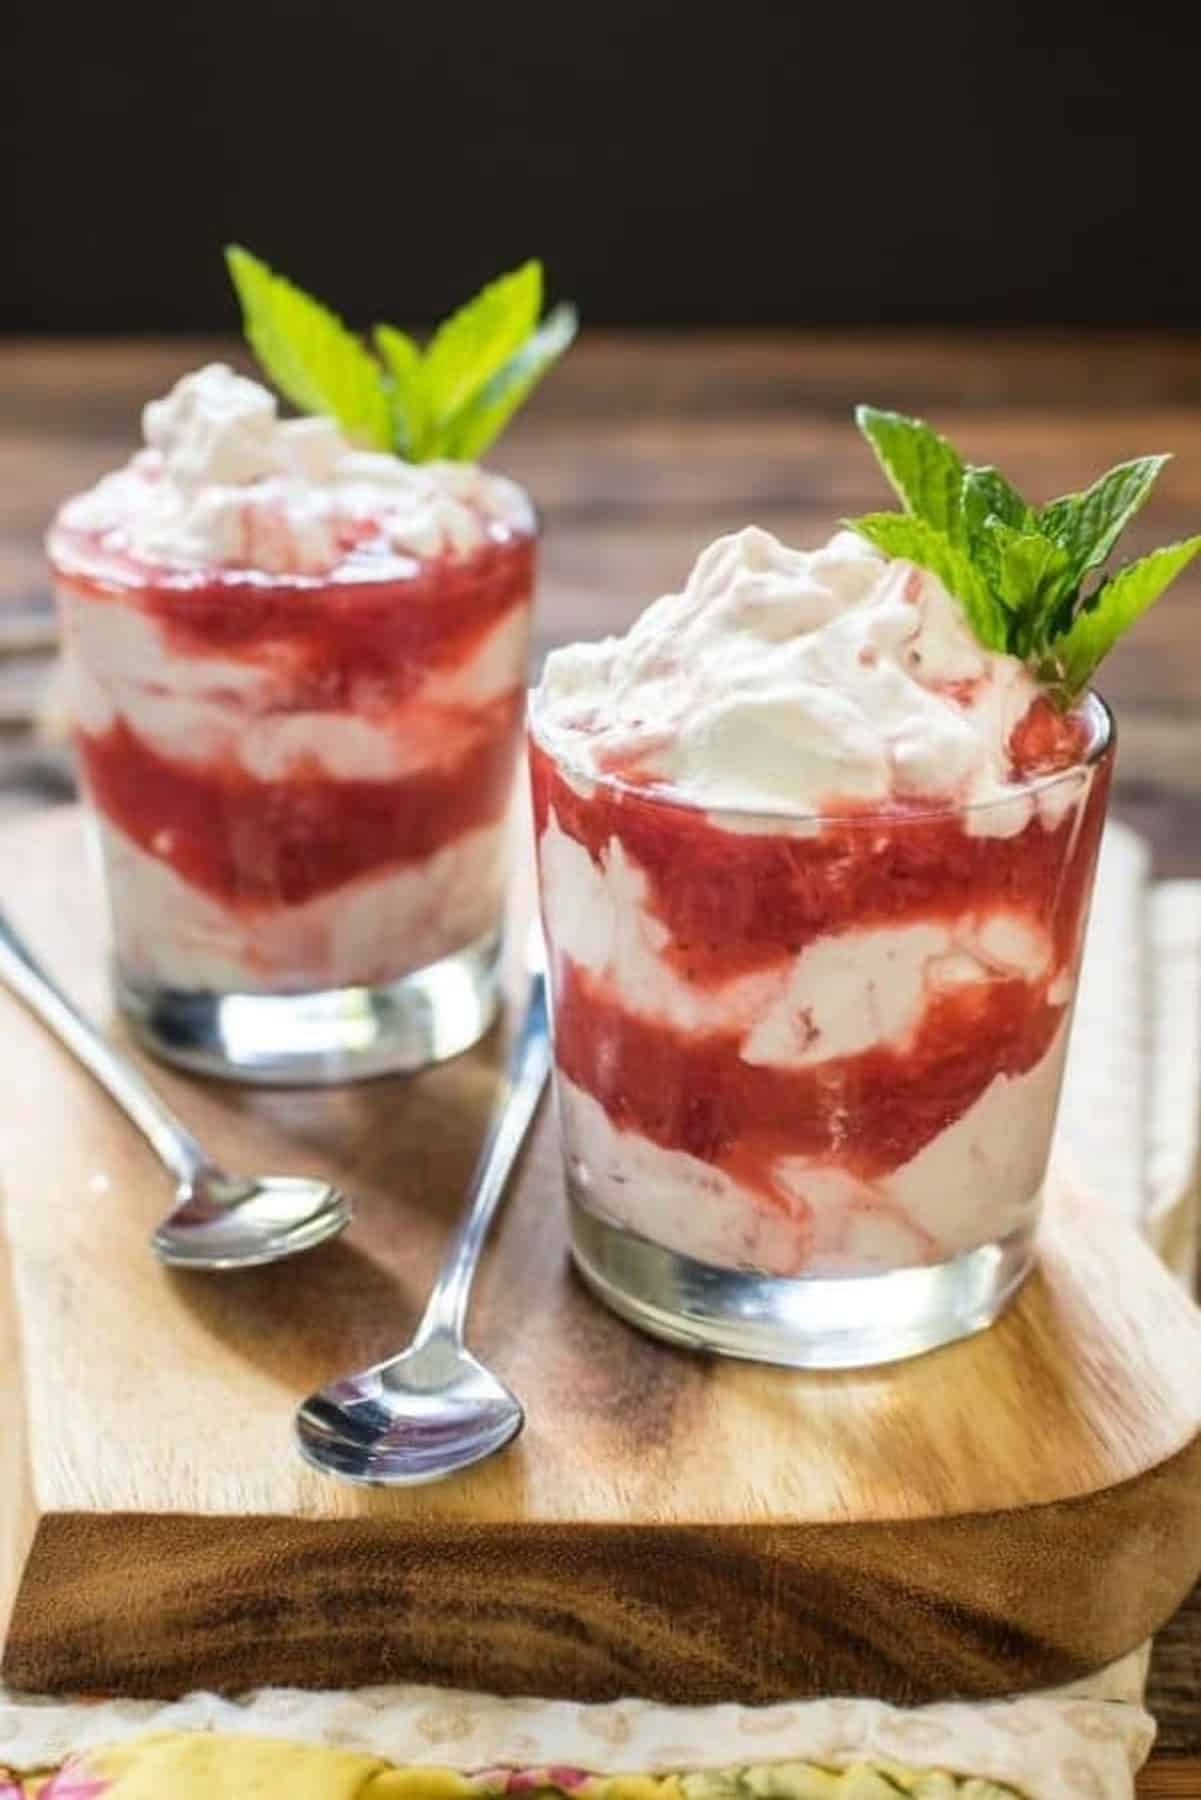 Strawberry Rhubarb served in a glass with mint leaves.